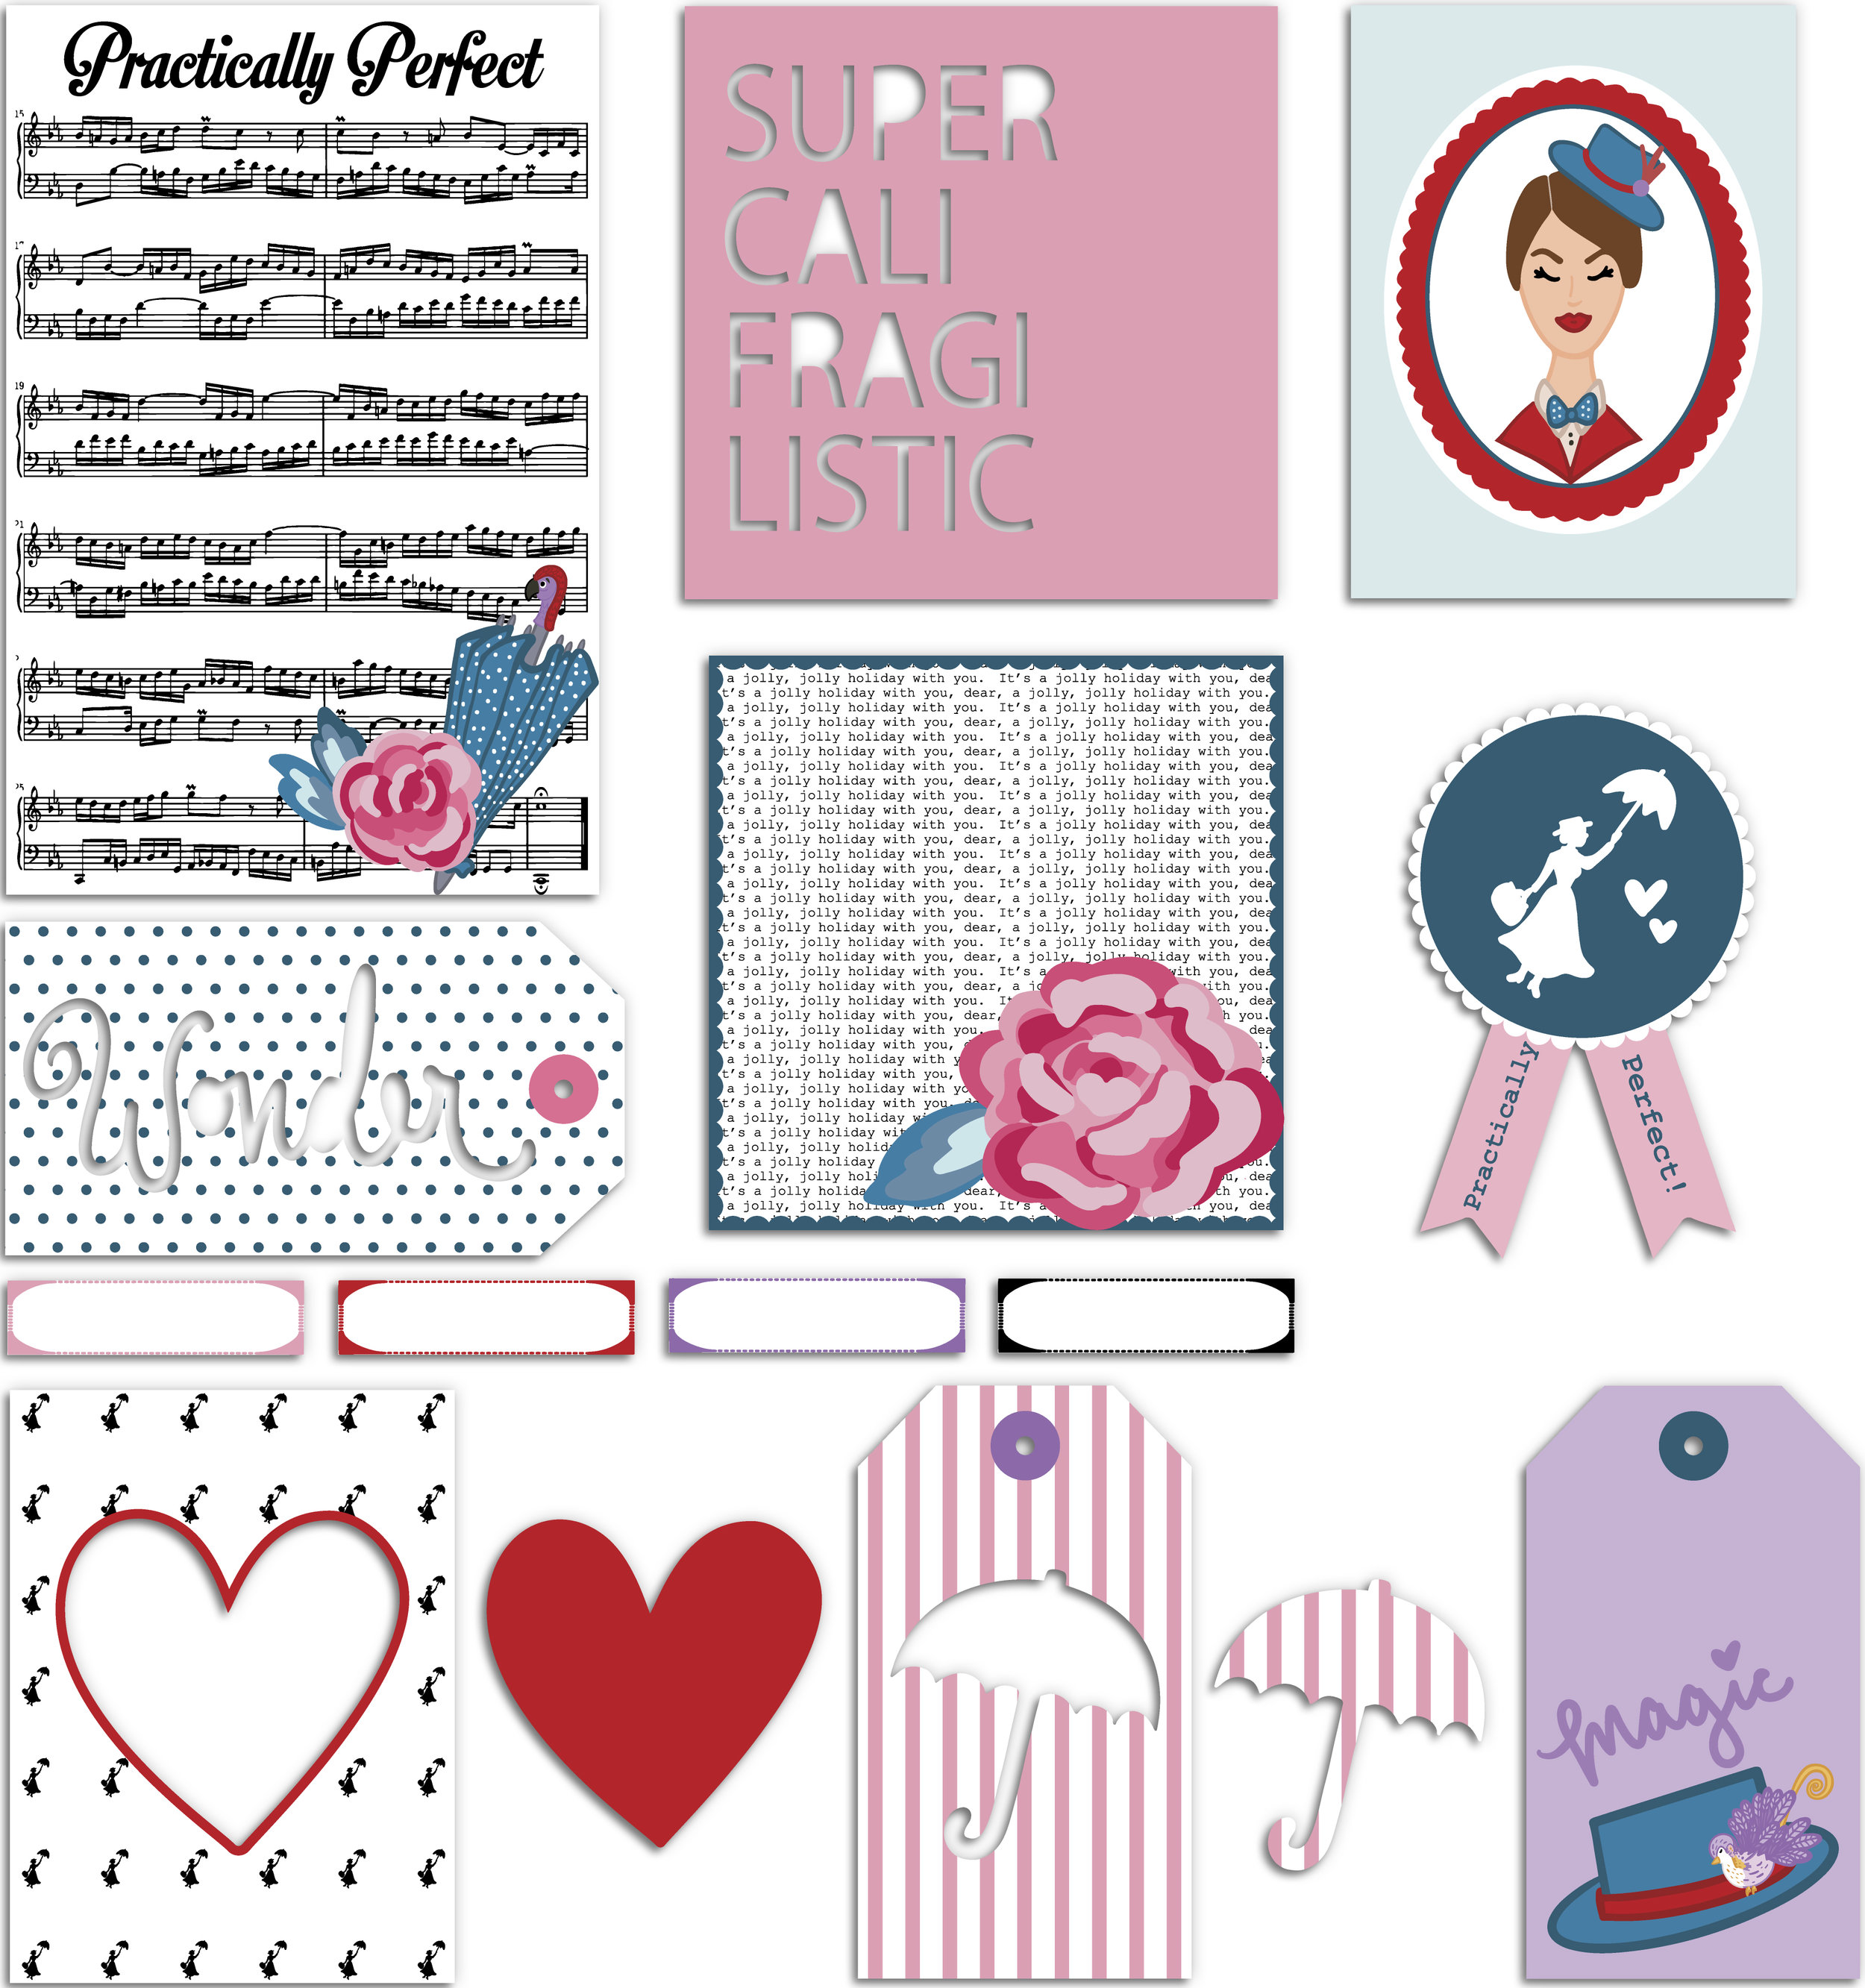 Practically Perfect - Stationery Pack with shadows.jpg